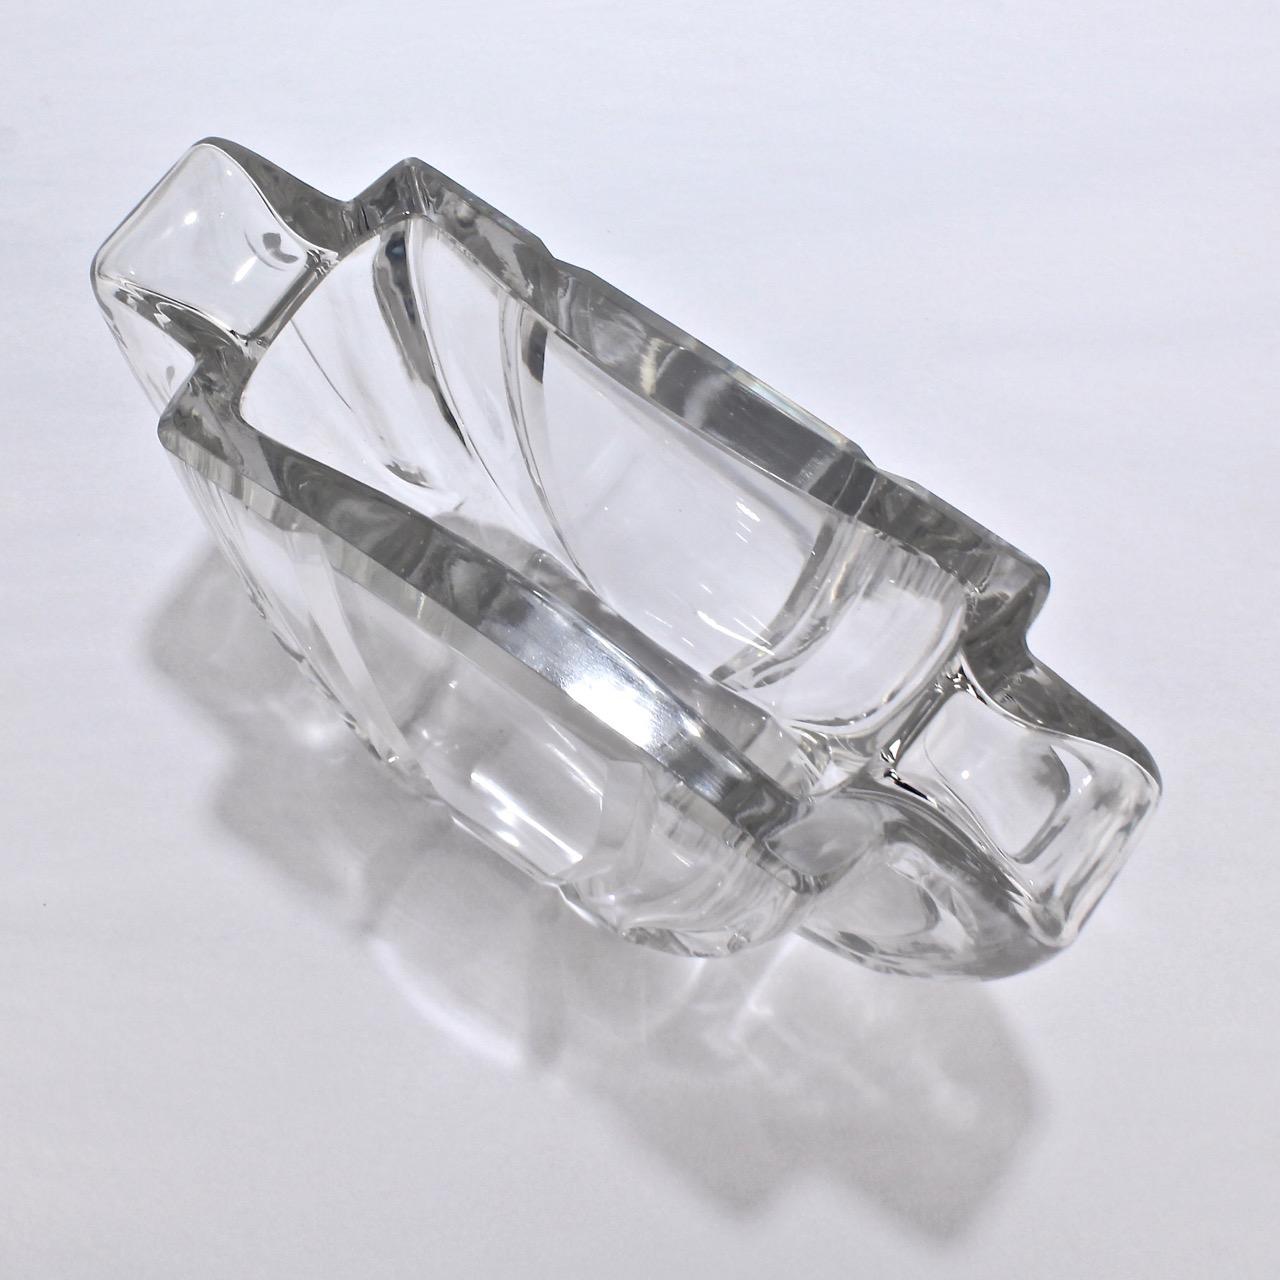 20th Century Art Deco Baccarat Twin-Handled Glass or Crystal Vase For Sale